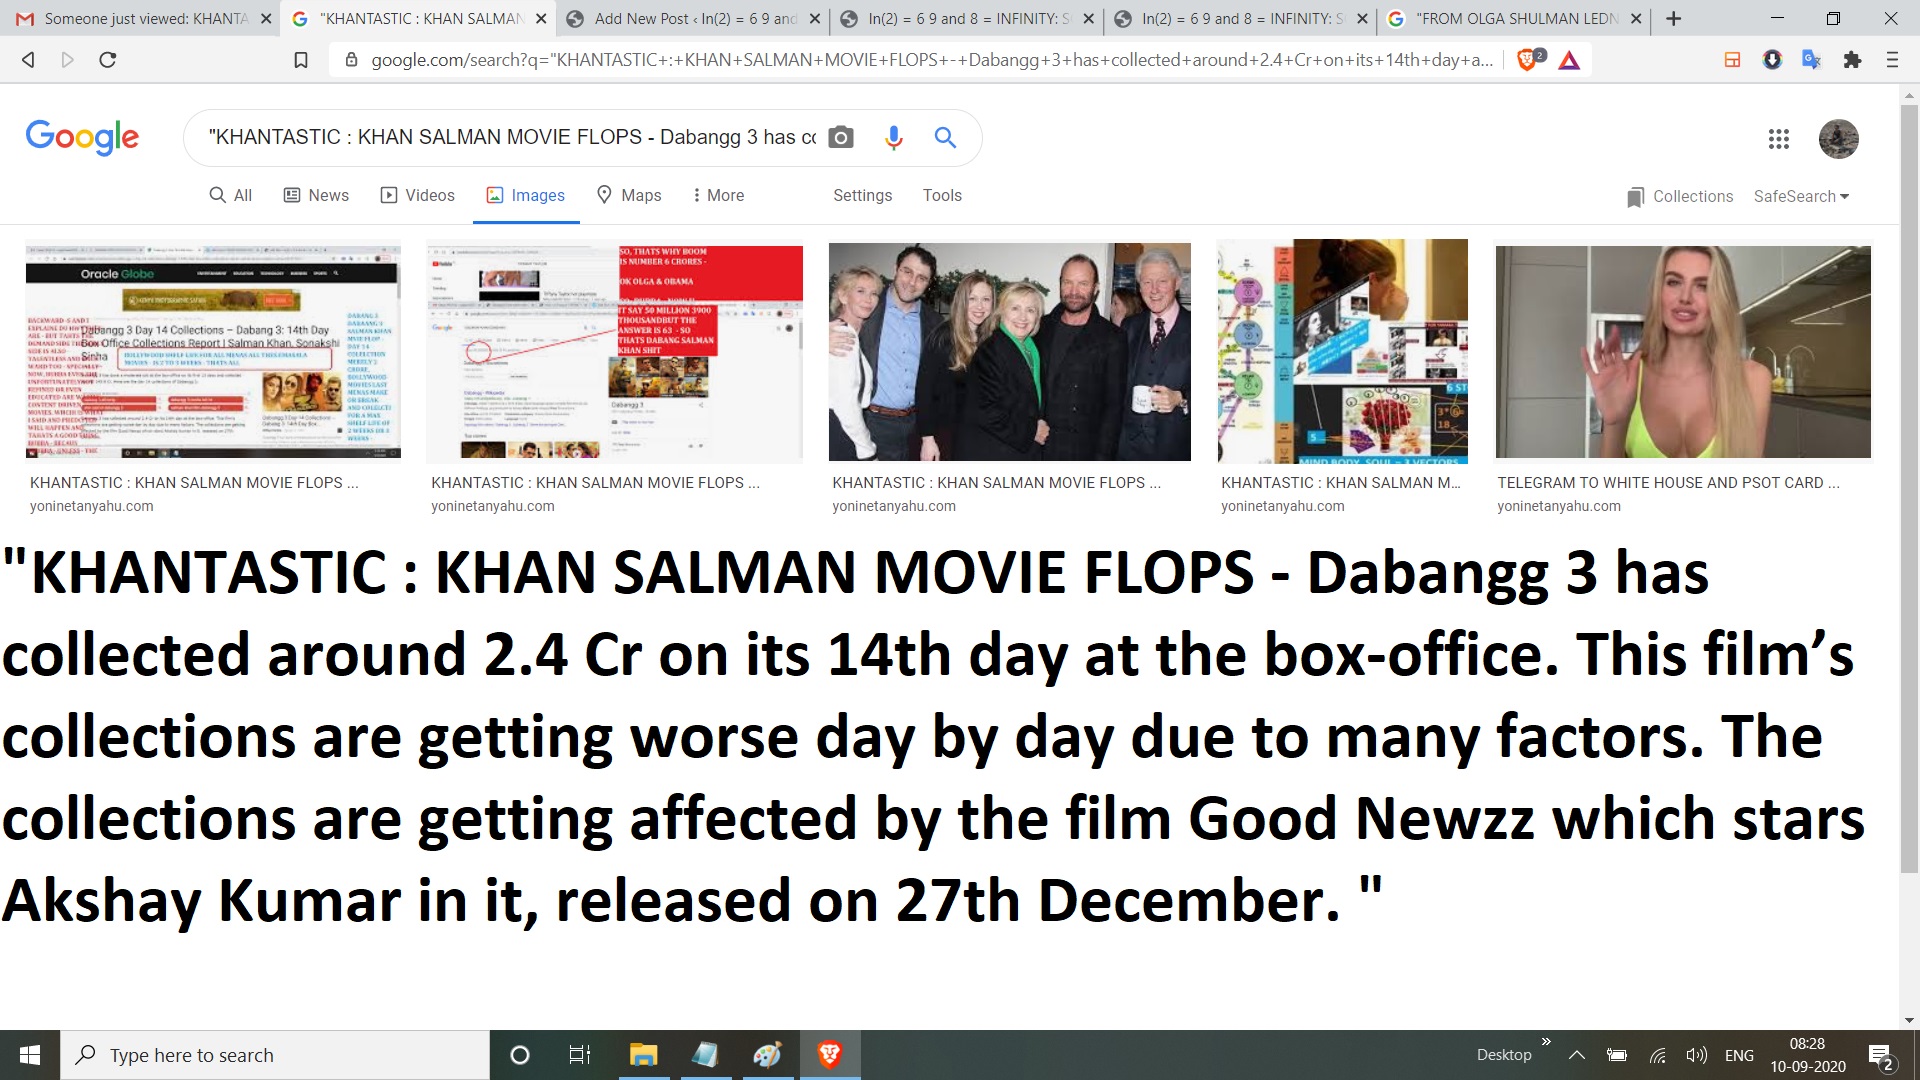 KHANTASTIC KHAN SALMAN MOVIE FLOPS - Dabangg 3 has collected around 2.4 Cr on its 14th day at the box-office. This film’s collections are getting worse day by day due to many factors. The collections are getting affected by the film Good Newzz which stars Akshay Kumar in it, released on 27th December